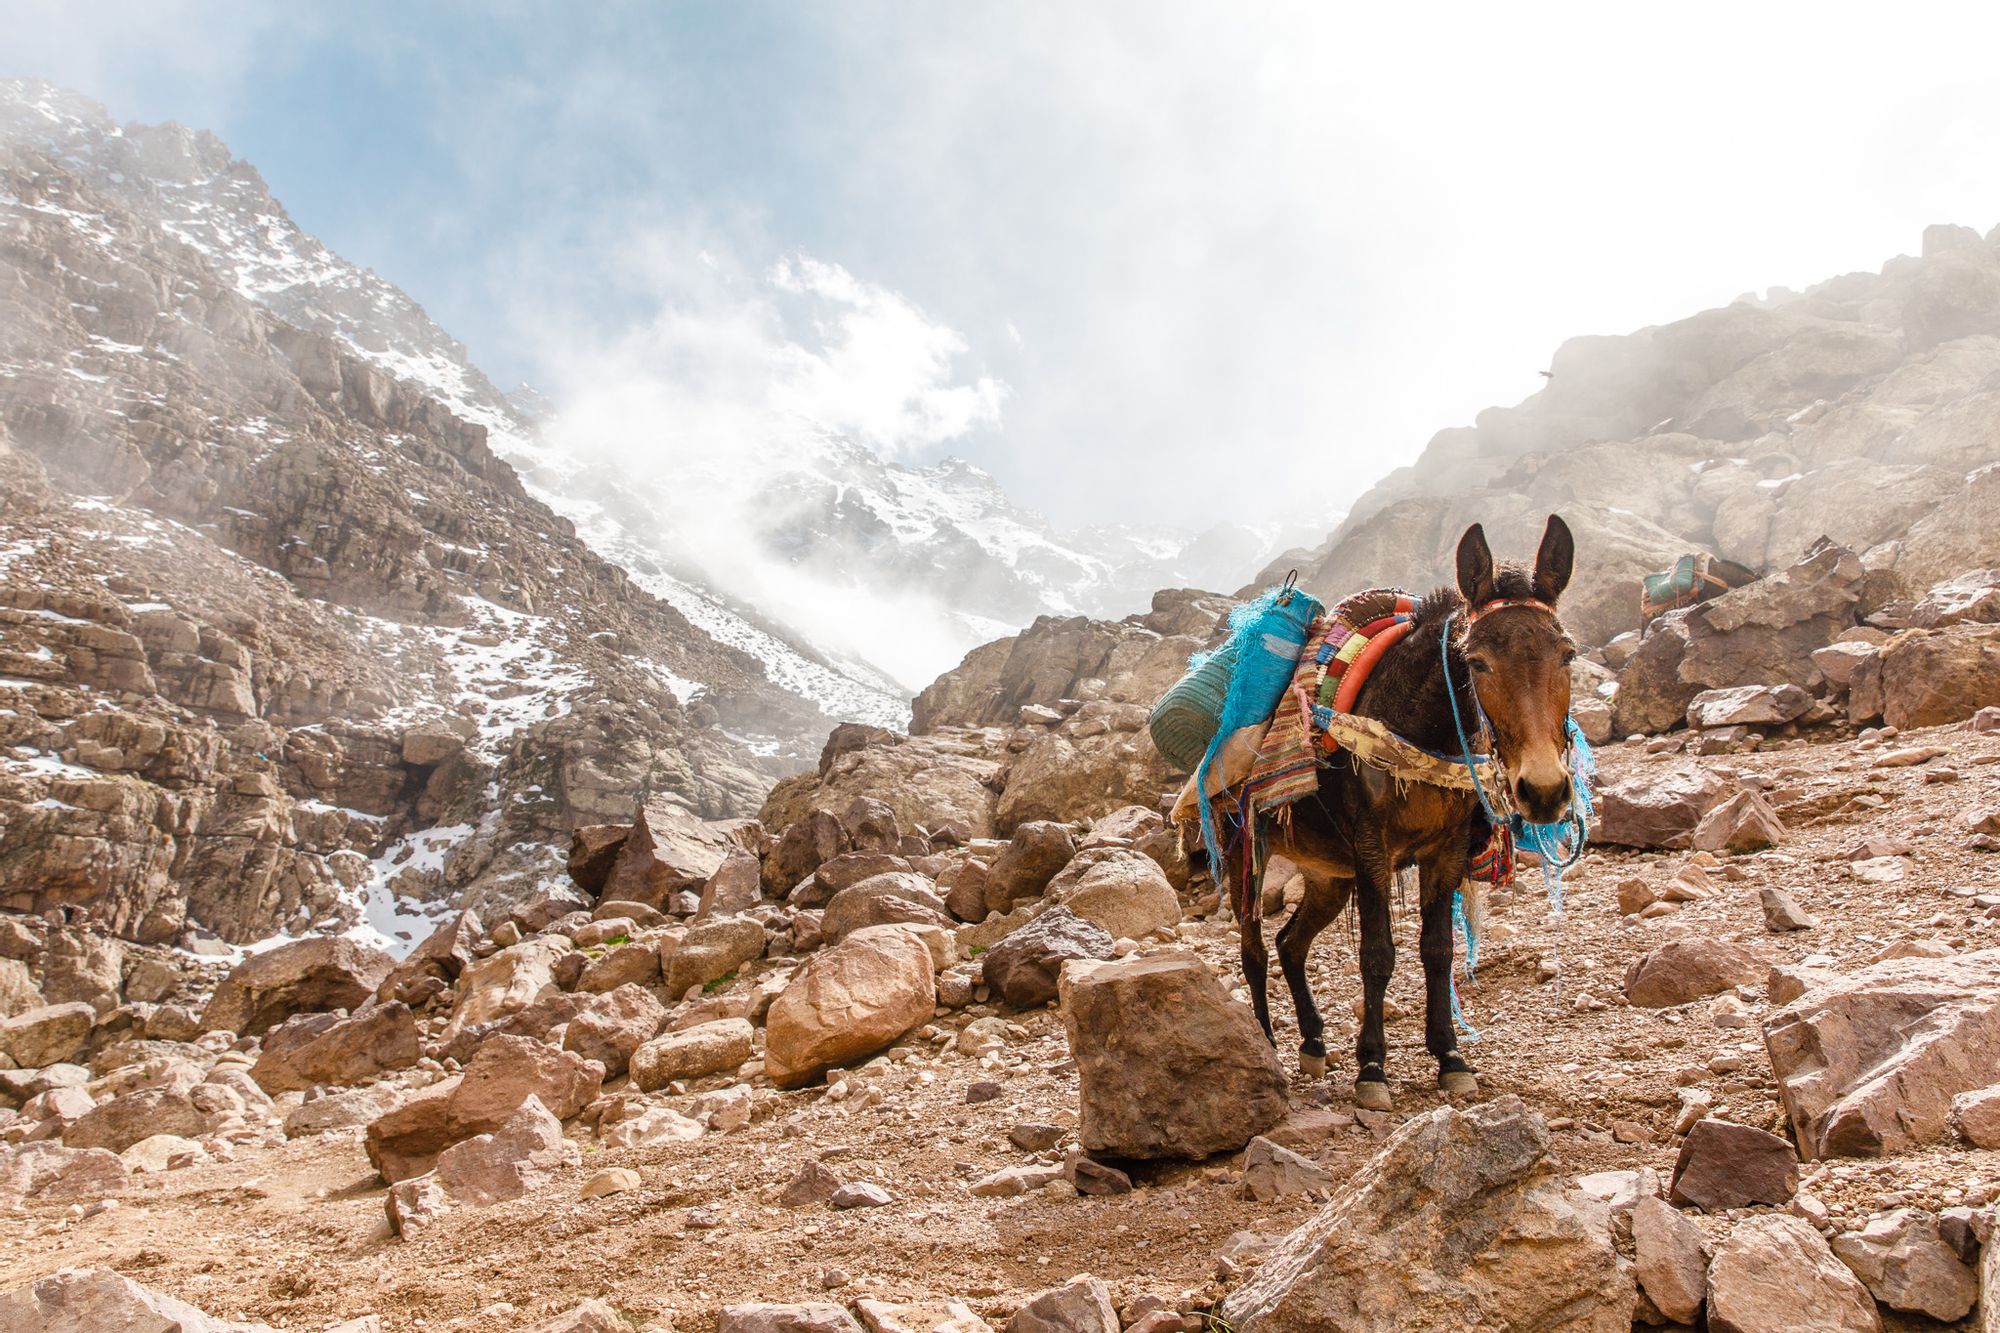 A laden pack mule in Morocco's High Atlas Mountains.